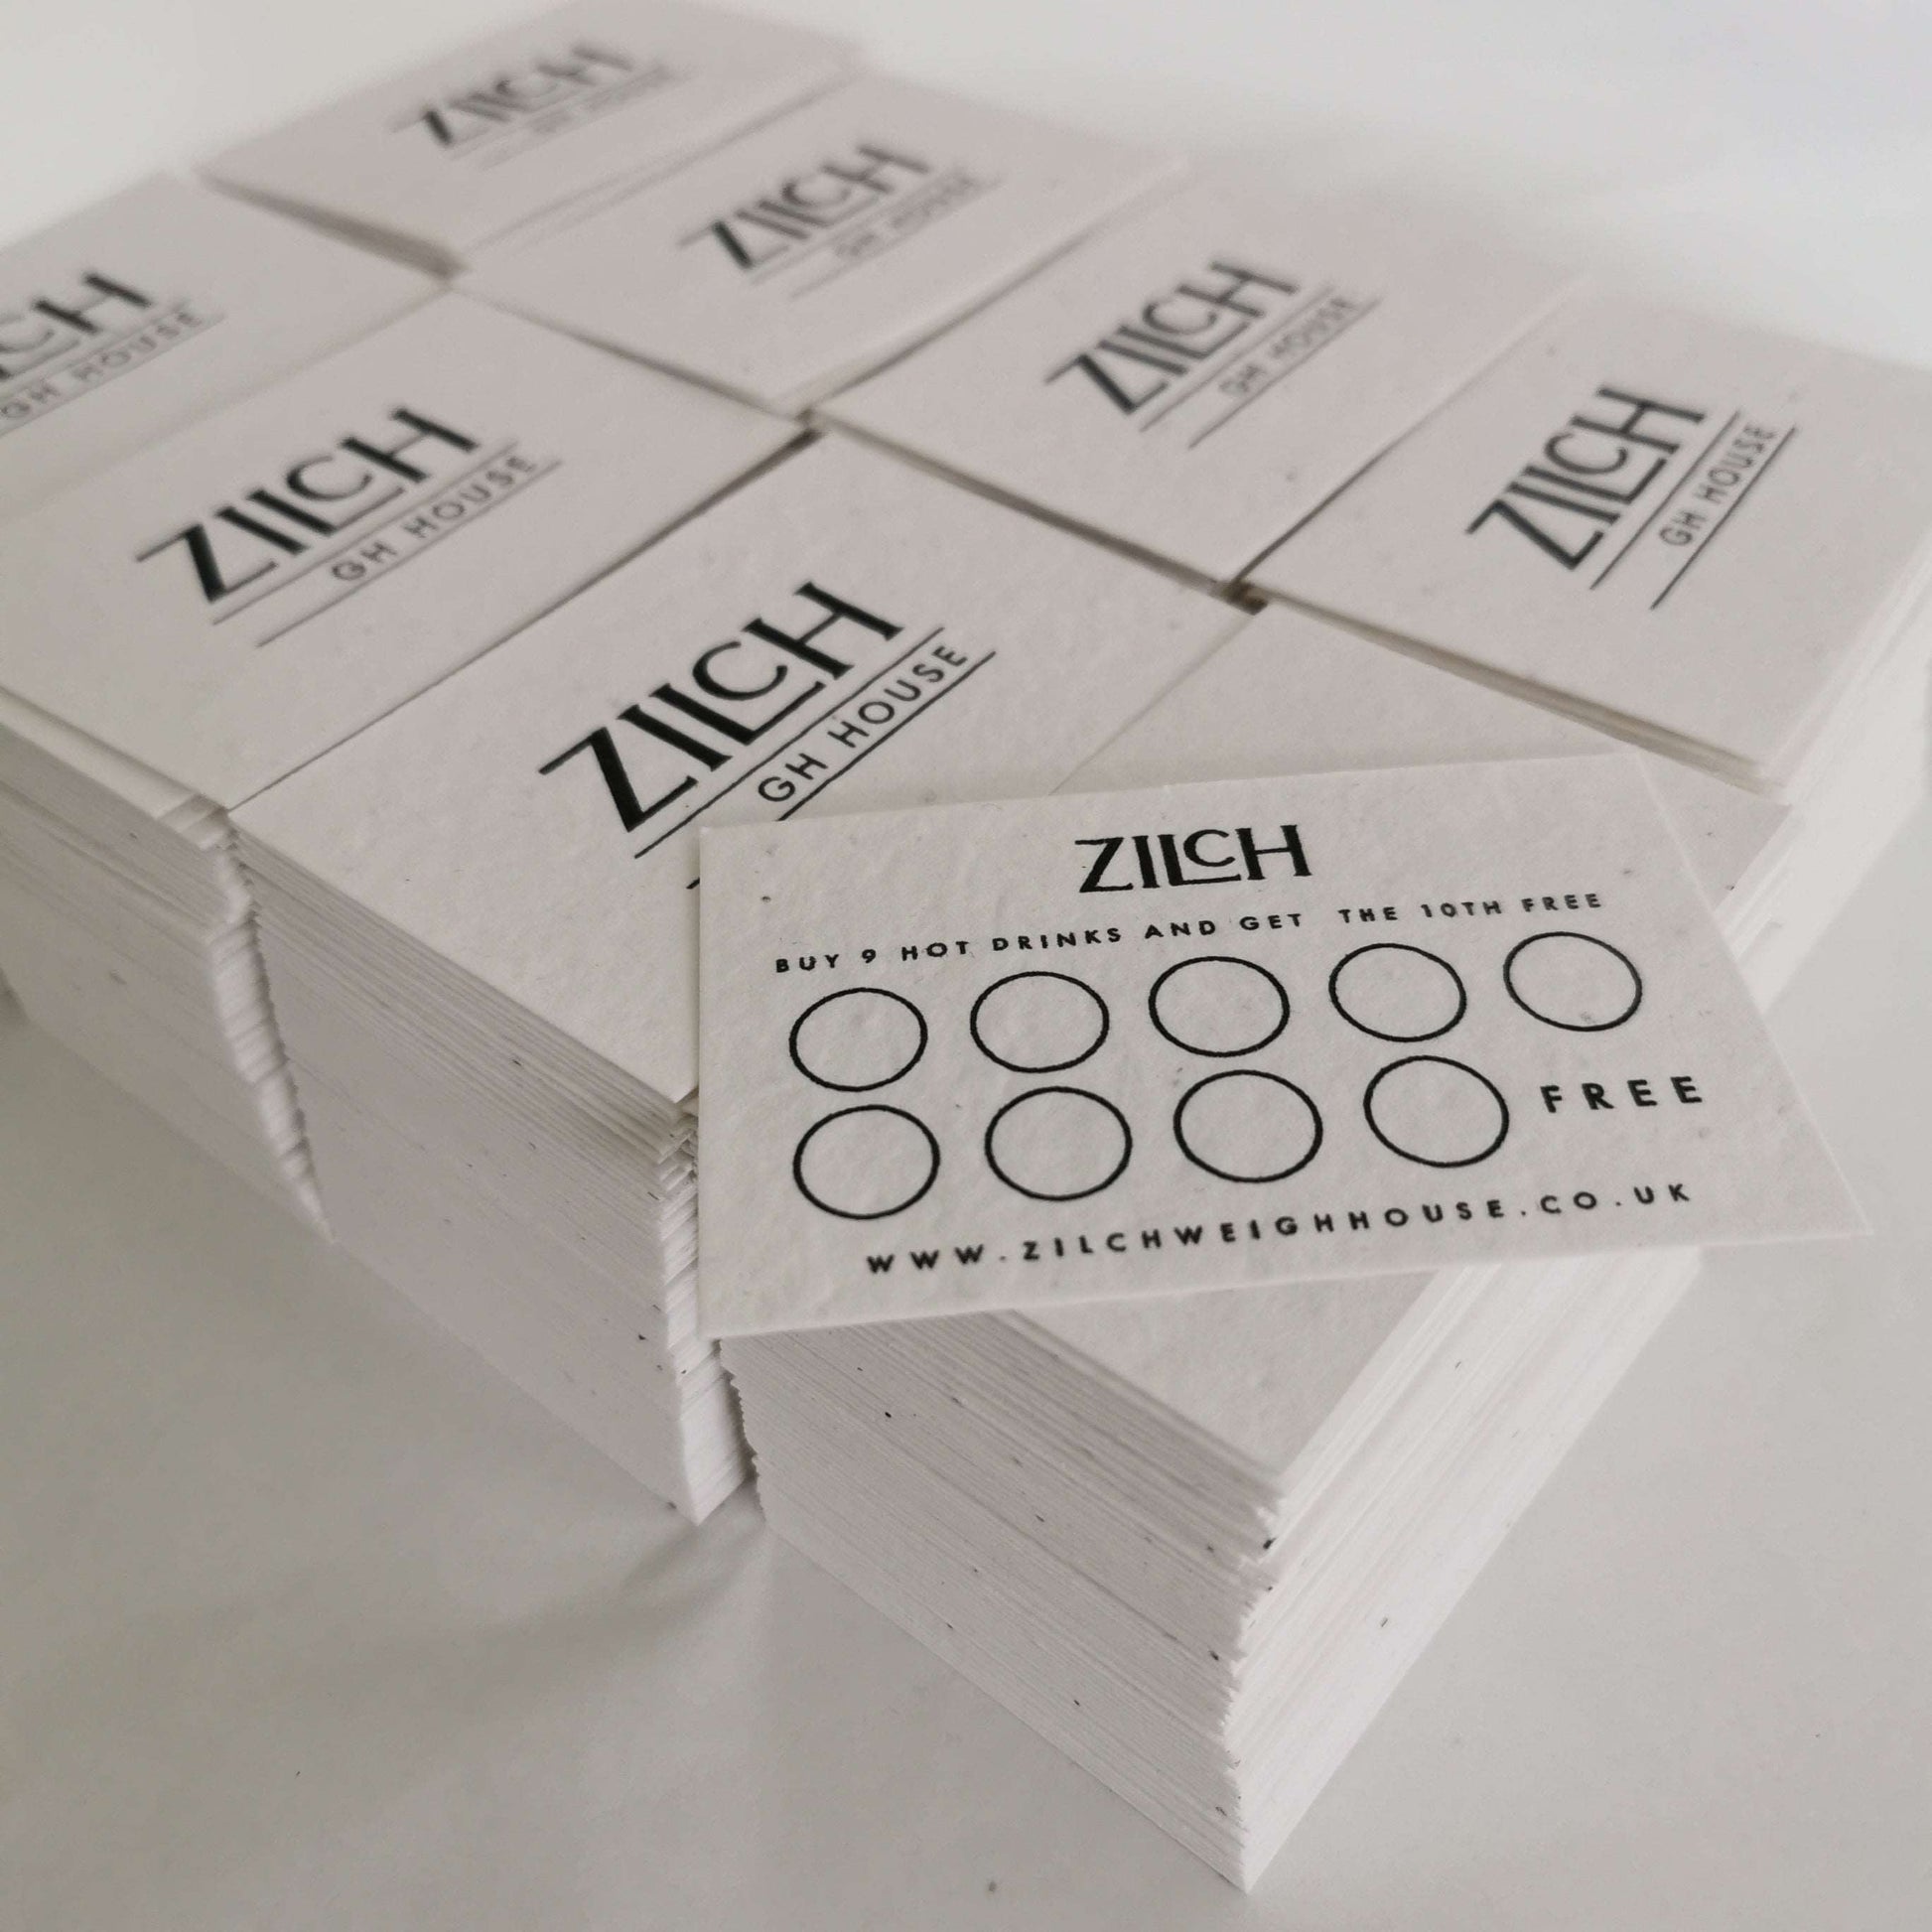 Plantable Seed Paper Business Cards - Your Logo & Details  Little Green Paper Shop